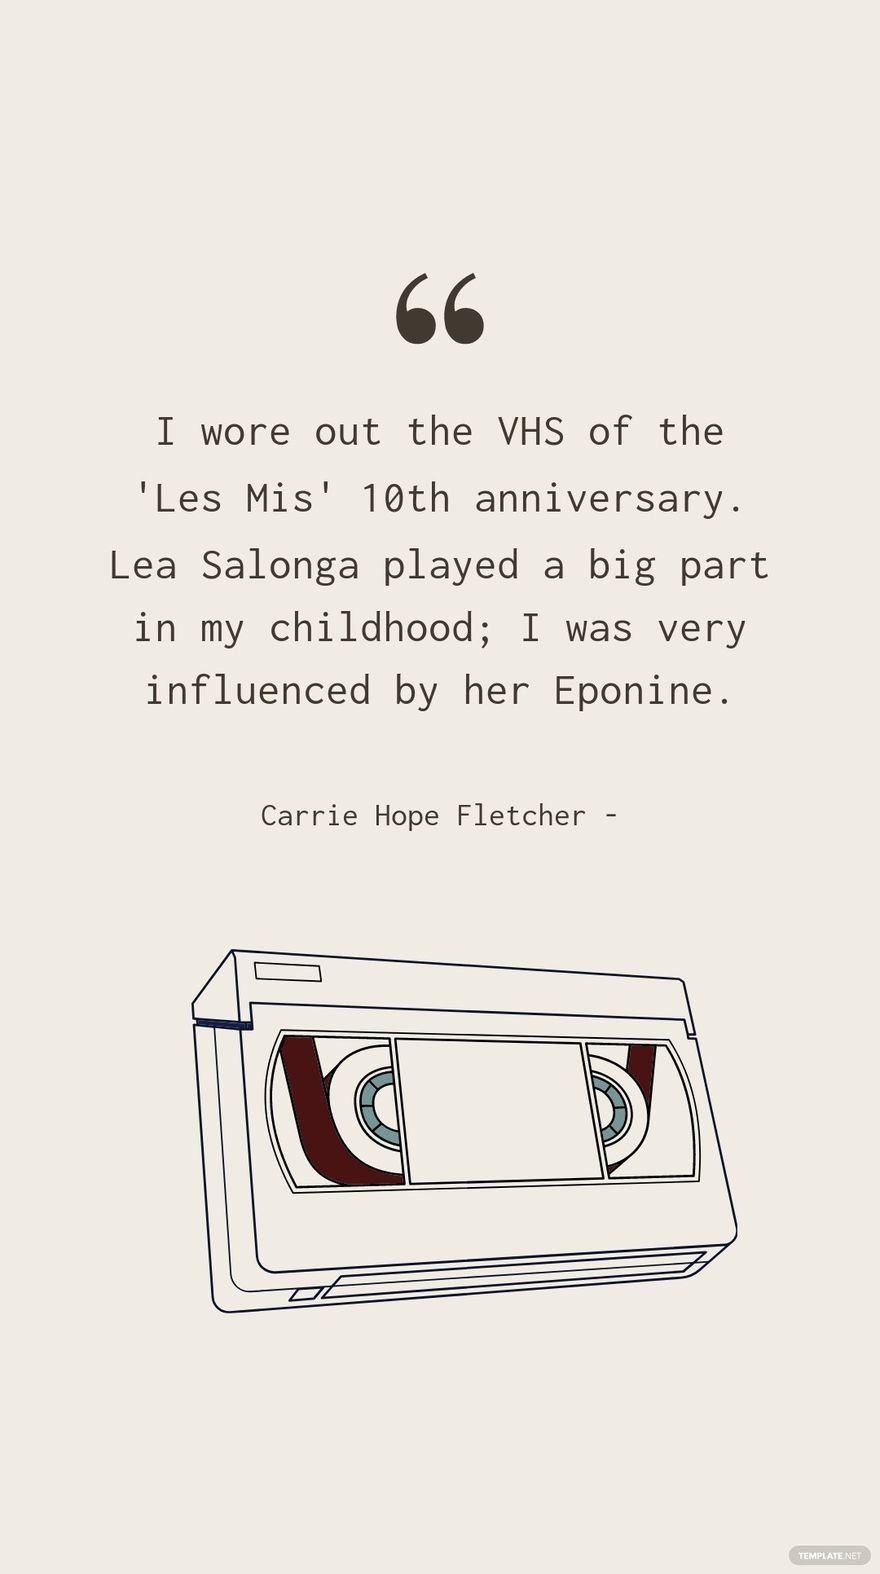 Free Carrie Hope Fletcher - I wore out the VHS of the 'Les Mis' 10th anniversary. Lea Salonga played a big part in my childhood; I was very influenced by her Eponine. in JPG